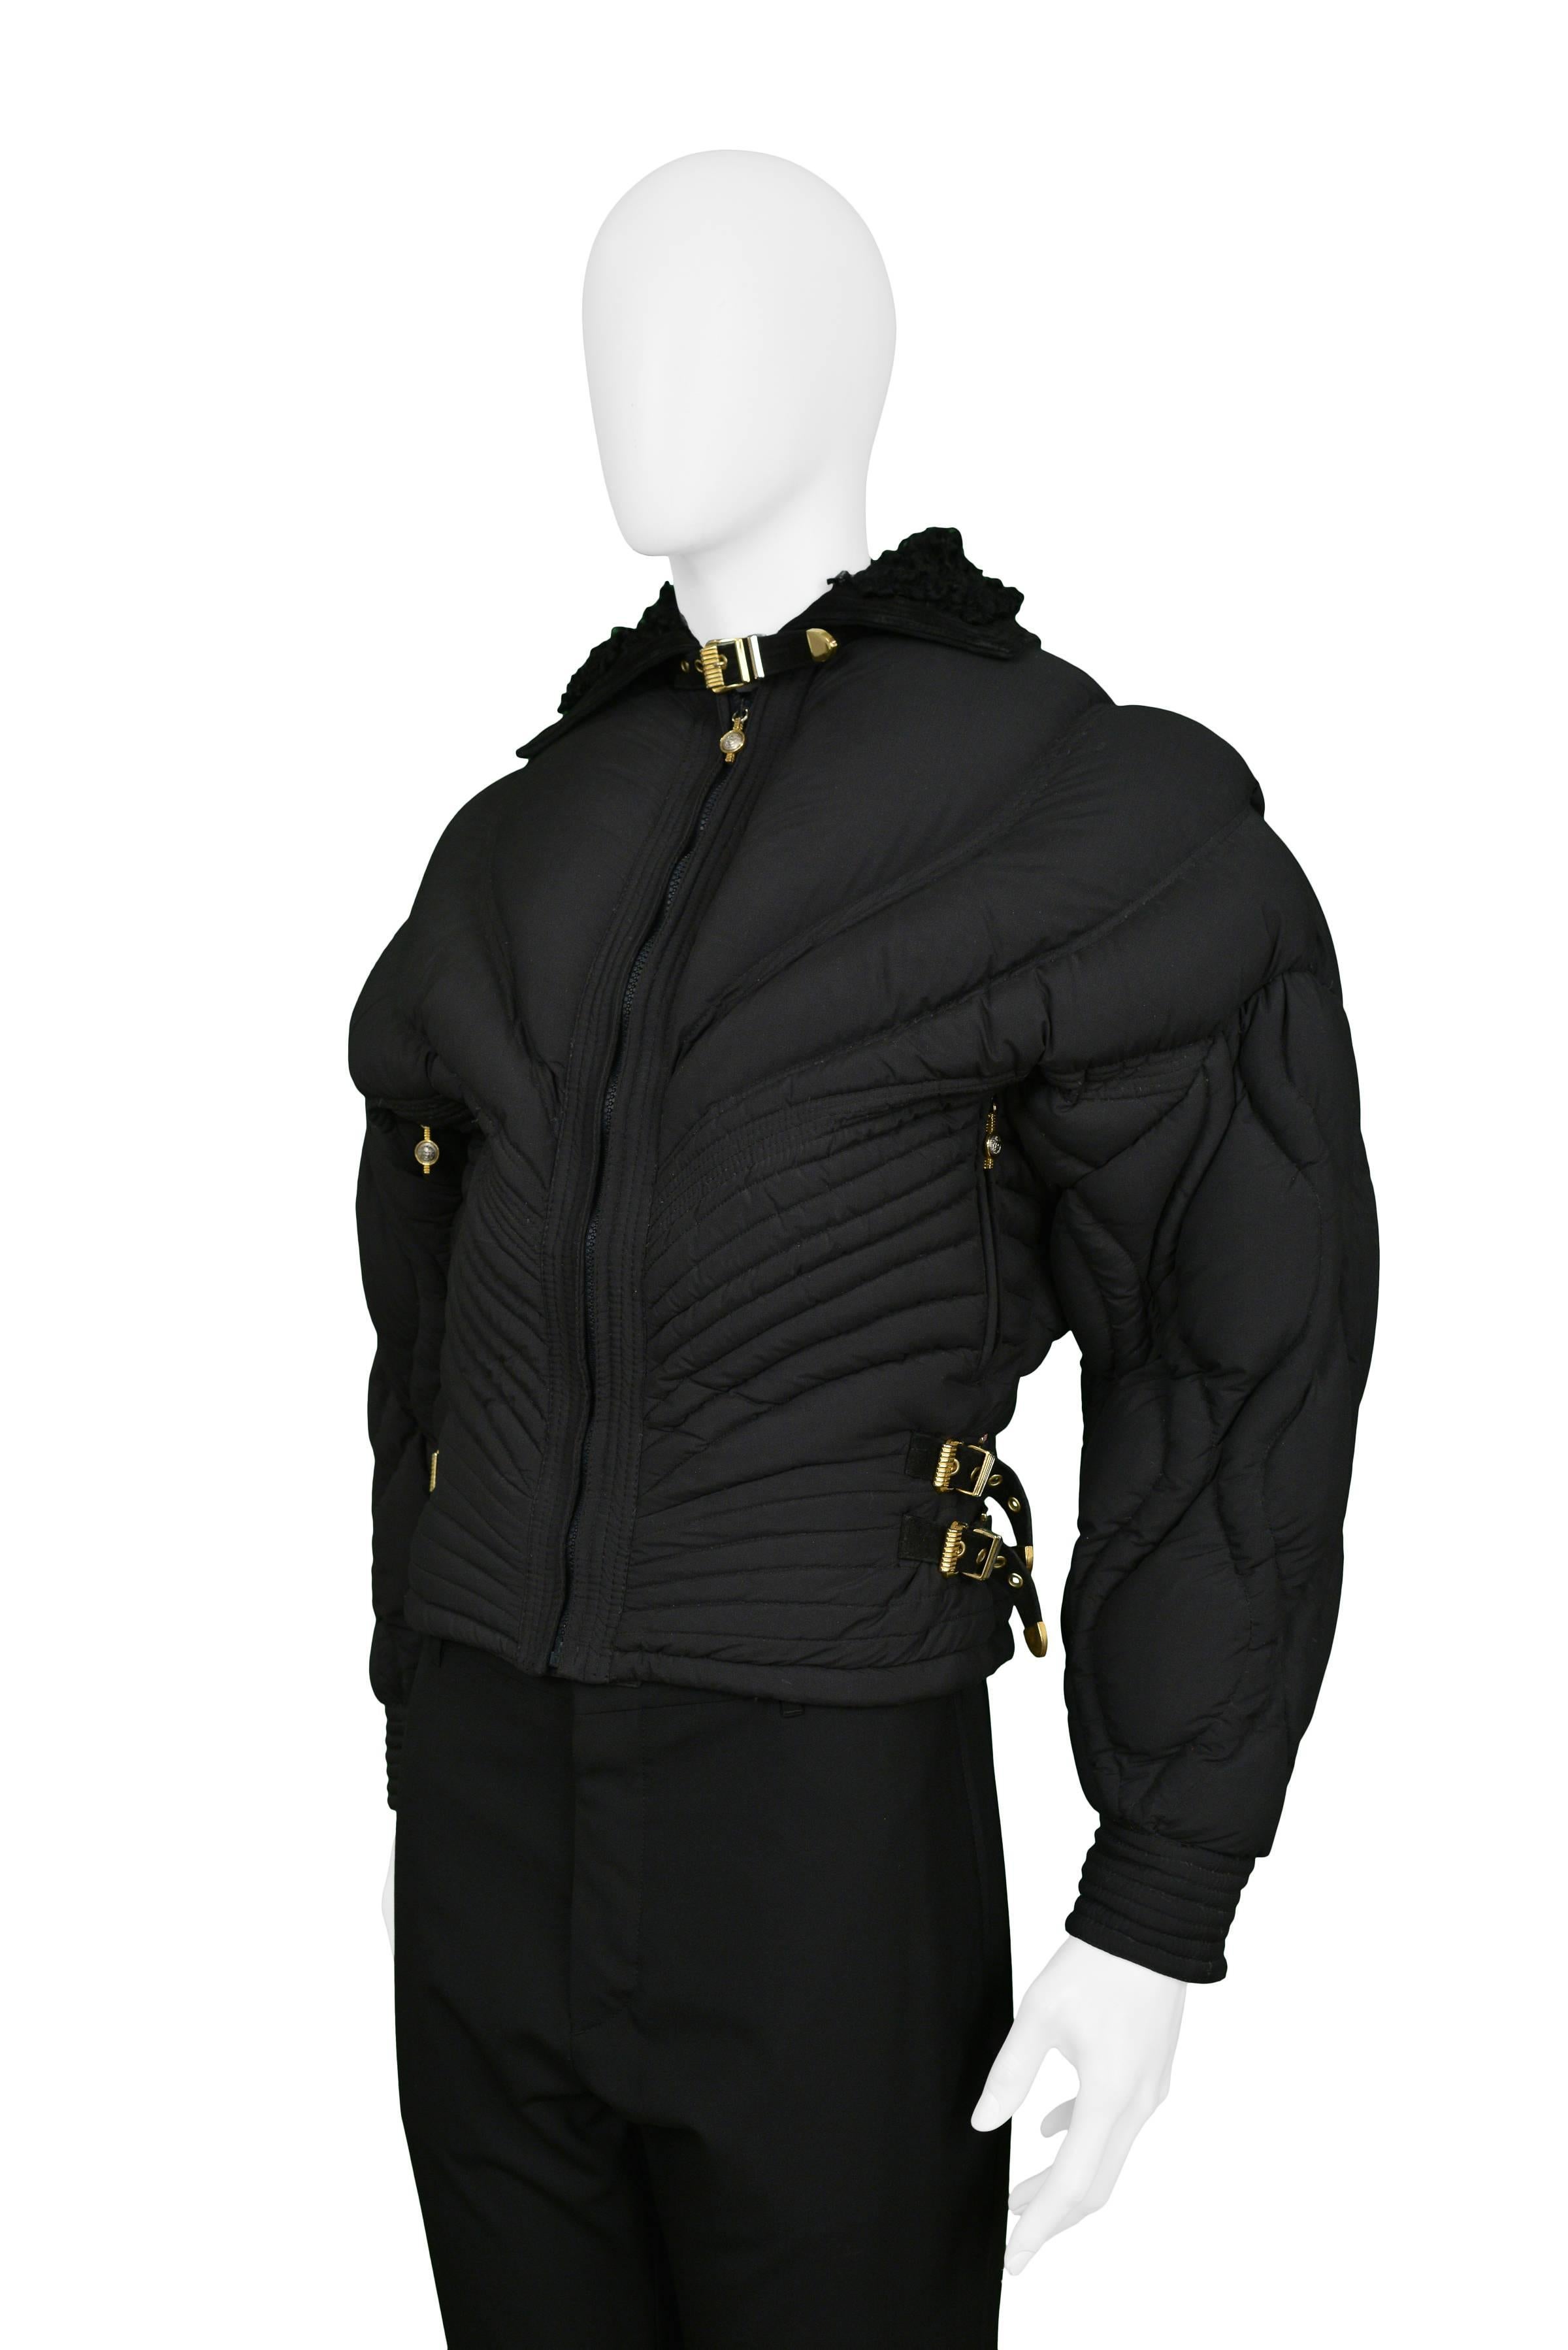 Vintage Gianni Versace rare apres quilted ski jacket in black brushed rayon. Corset style waist has leather and gold bondage buckles. The zipper pulls through out are adorned with the Medusa icon. Jacket is trimmed in black suede with Mongolian fur